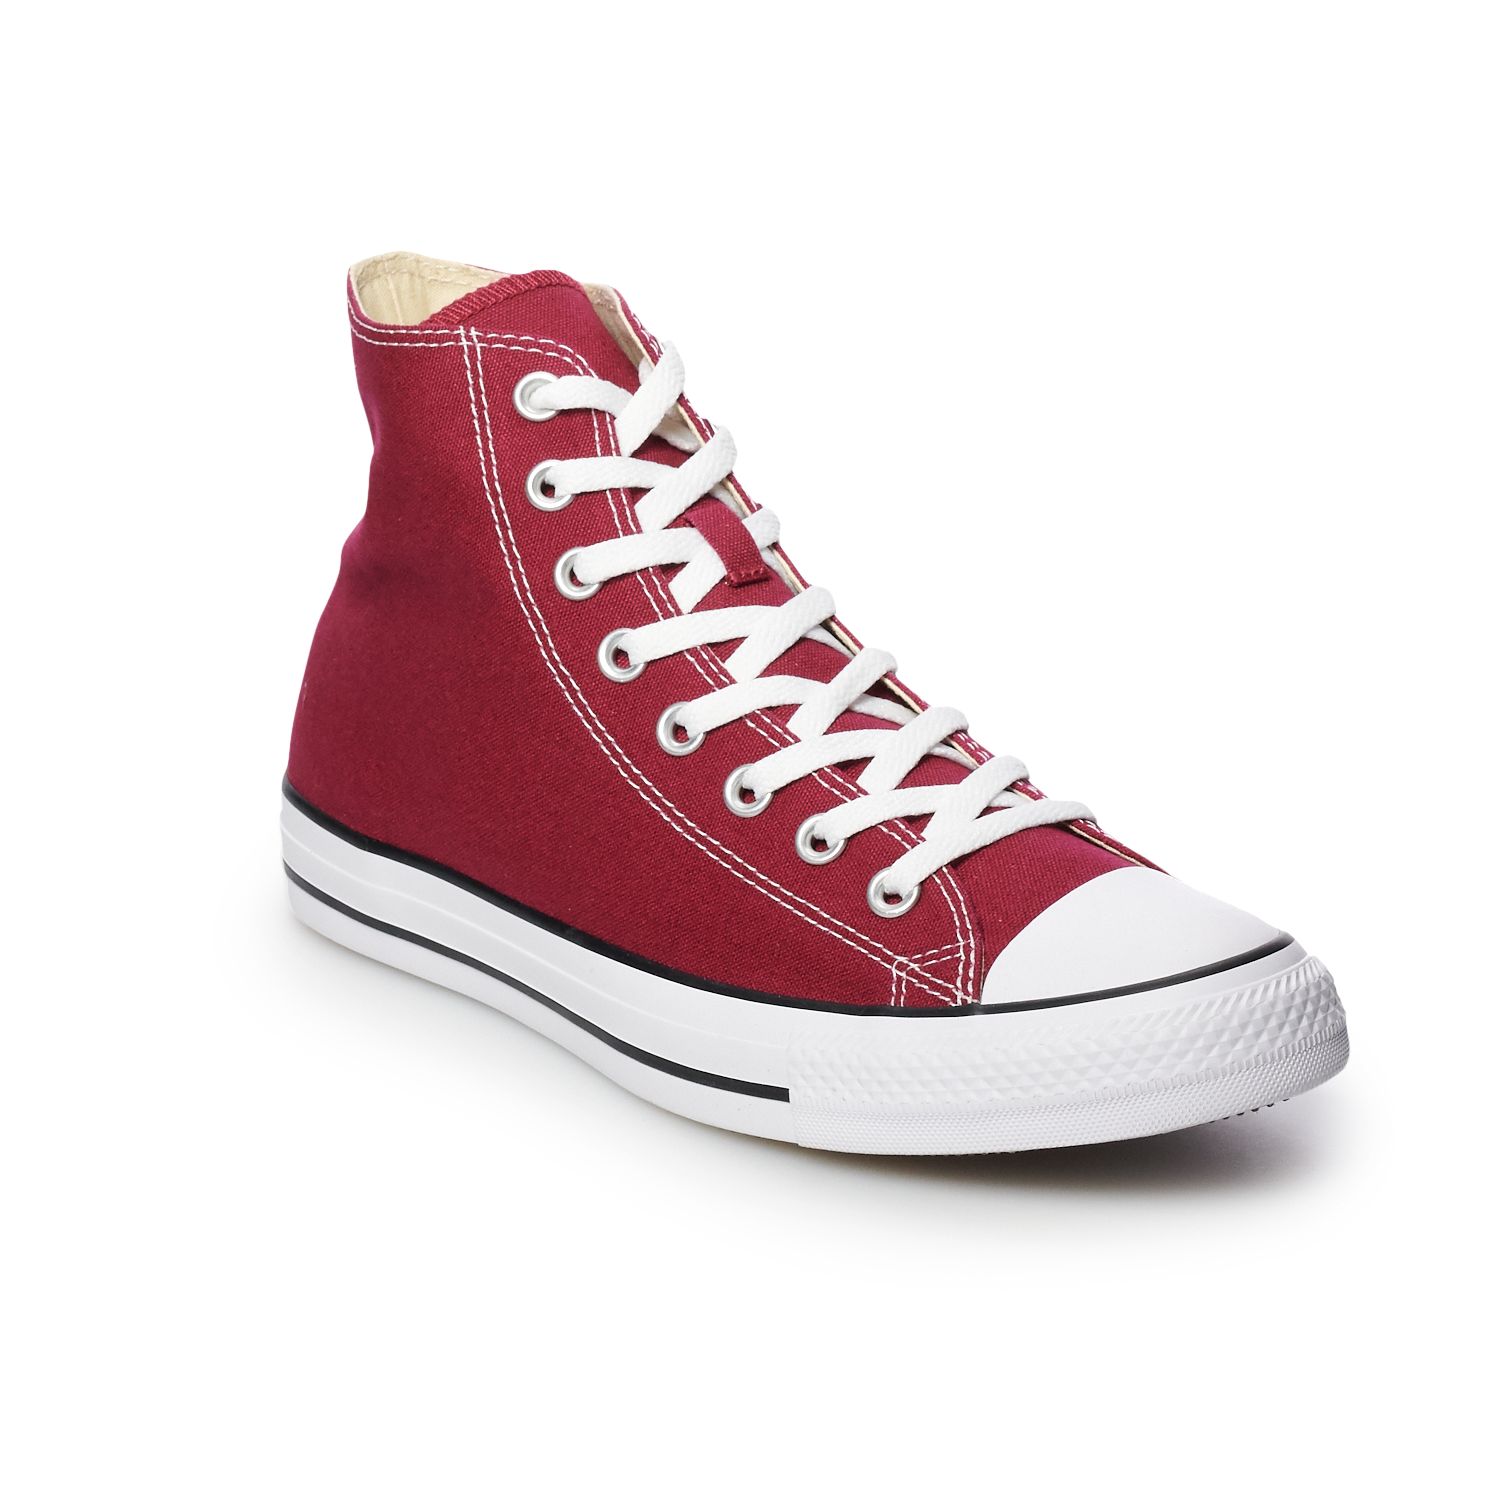 Adult Converse Chuck Taylor All Star 